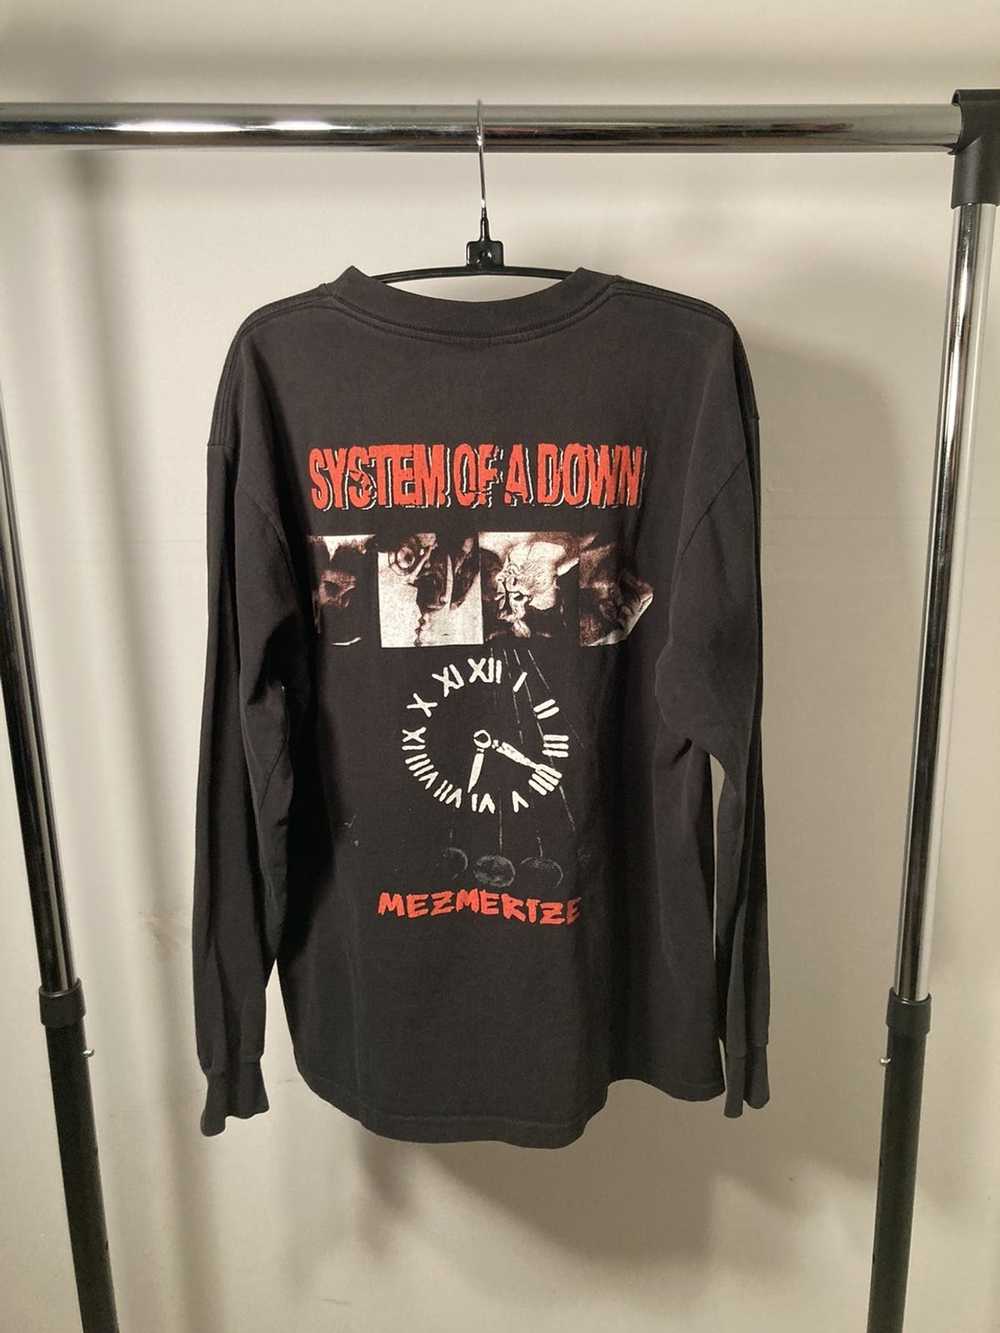 Band Tees System of a Down L/S mesmerize tee - image 2